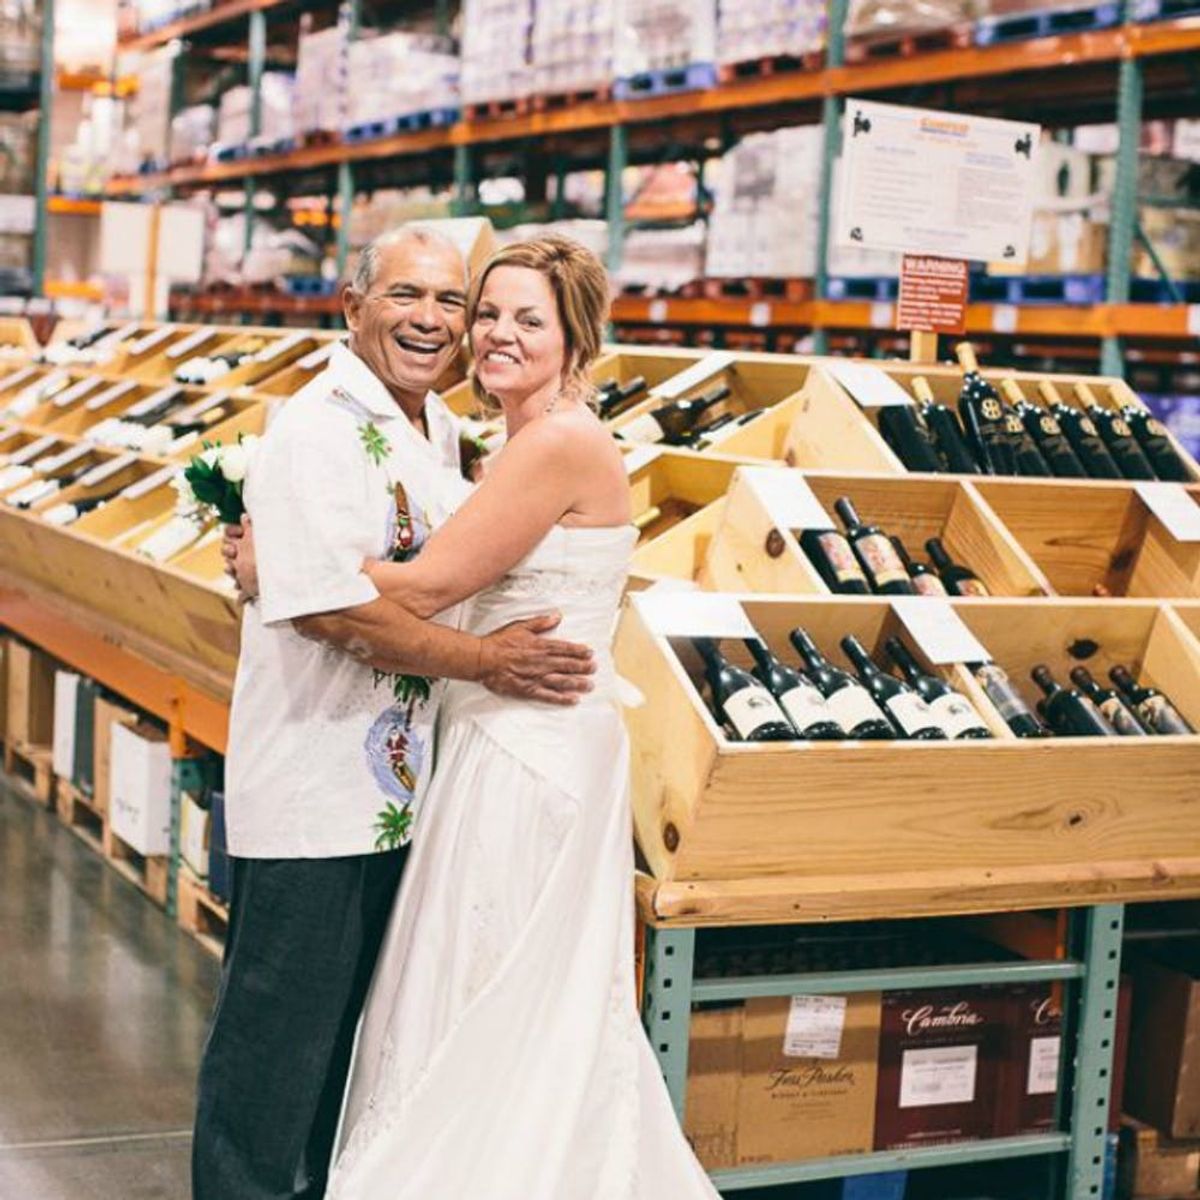 This Couple Got Married at Costco